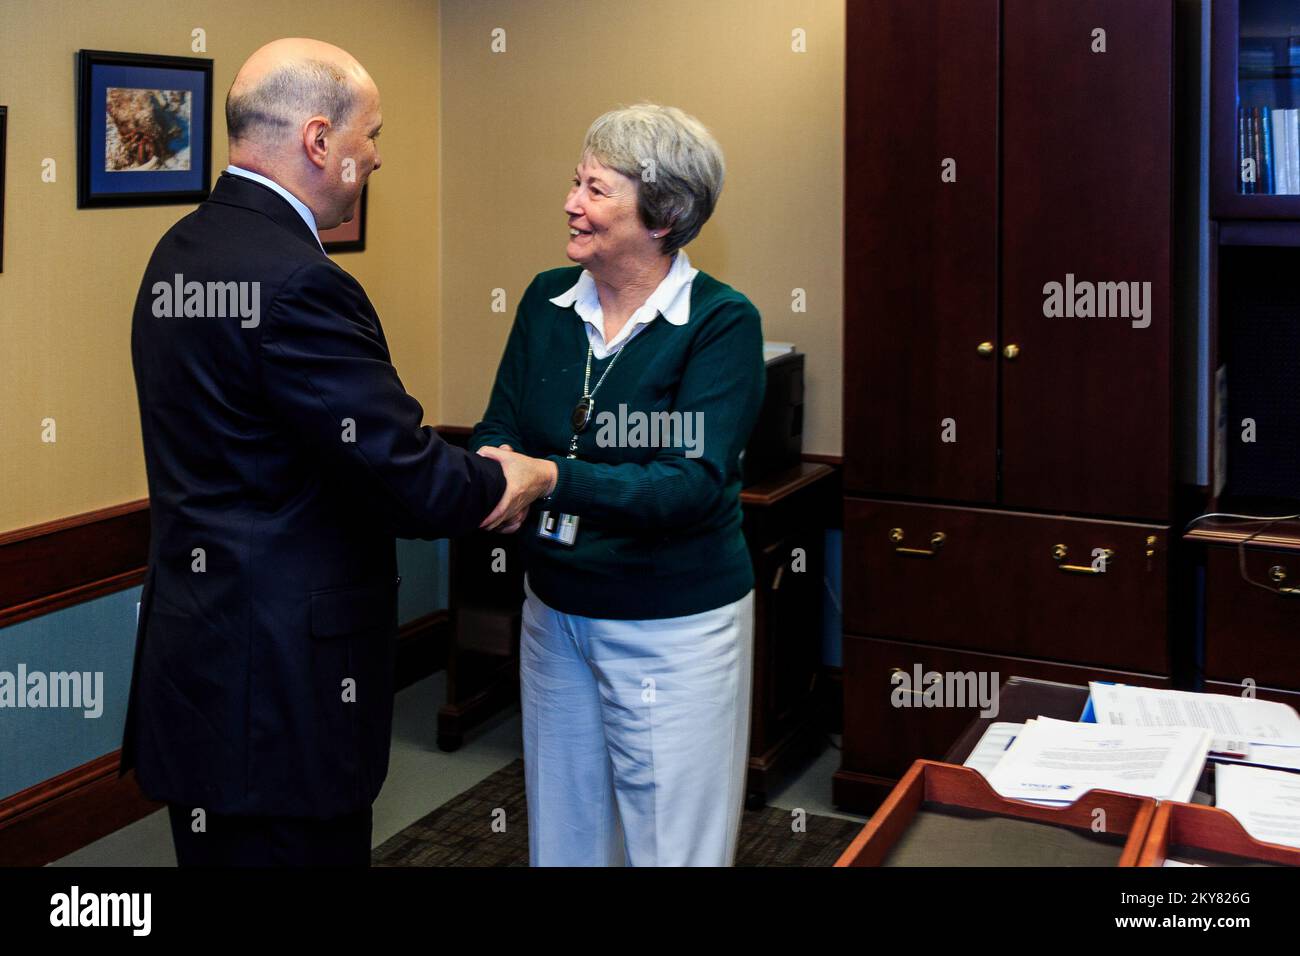 FEMA Chief of Staff meets with Regional Director of FEMA Region.. Photographs Relating to Disasters and Emergency Management Programs, Activities, and Officials Stock Photo